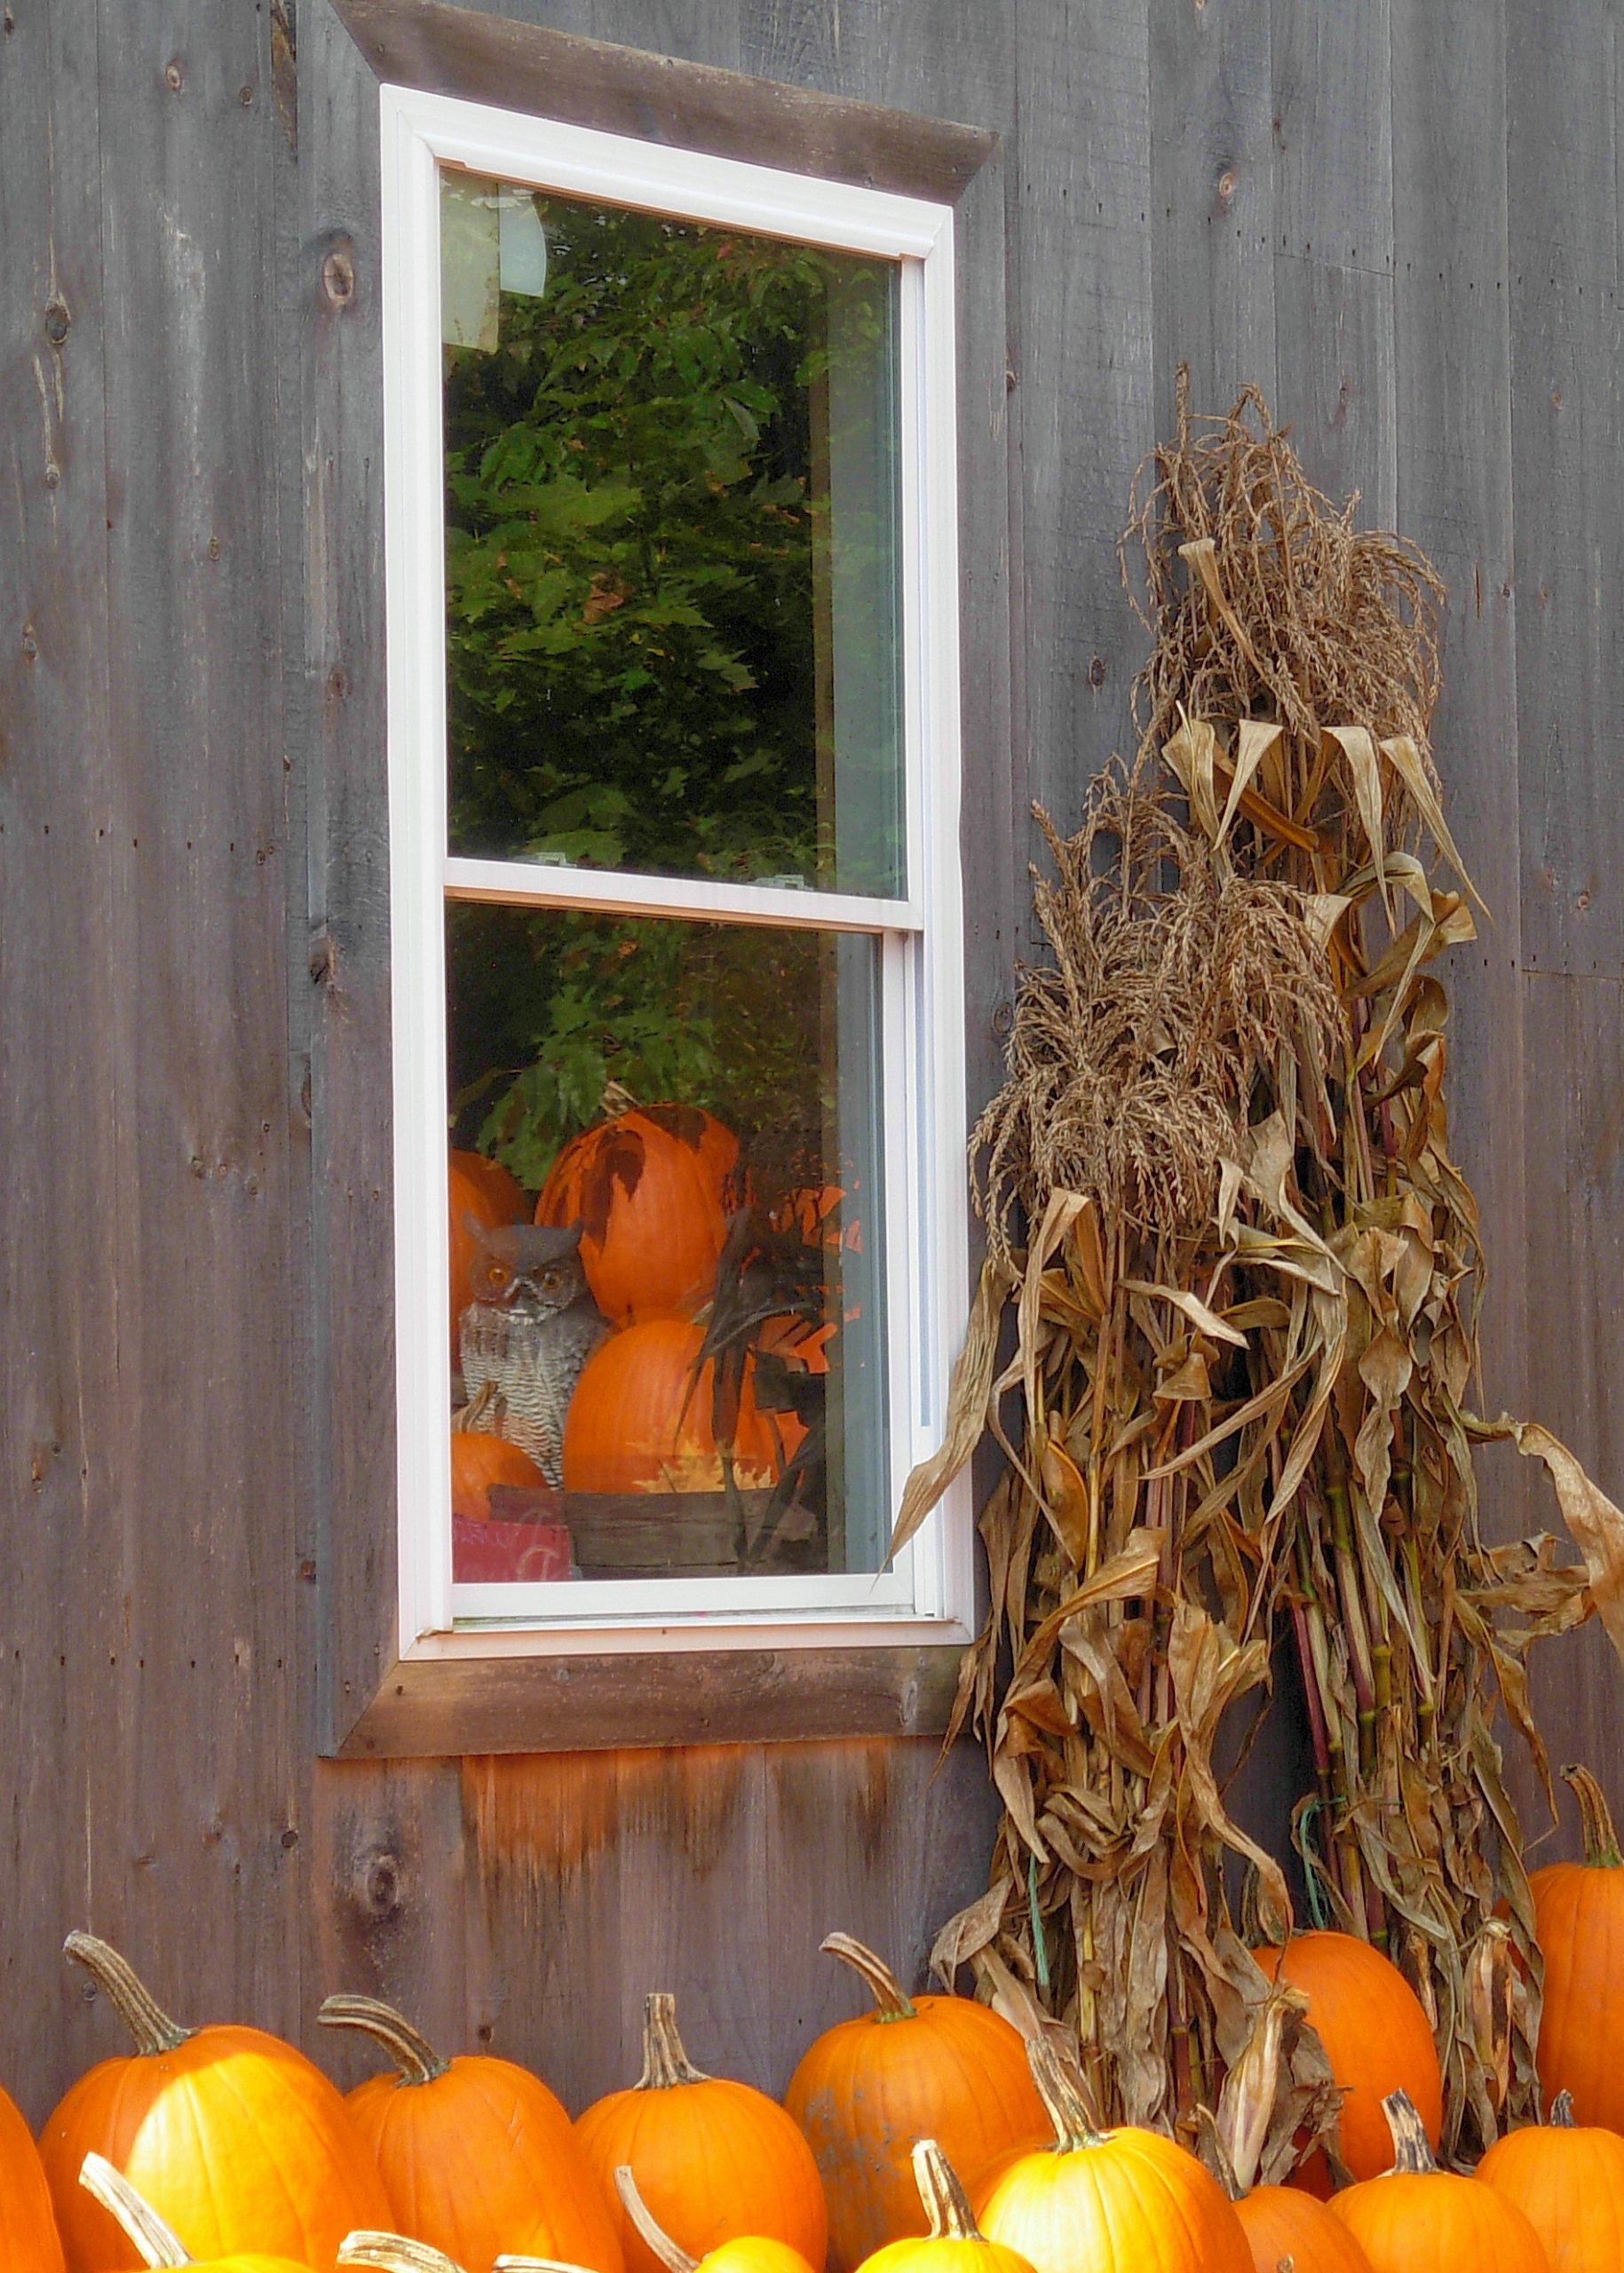 Pumpkins Reflected In An Apple Shed Window (user submitted)